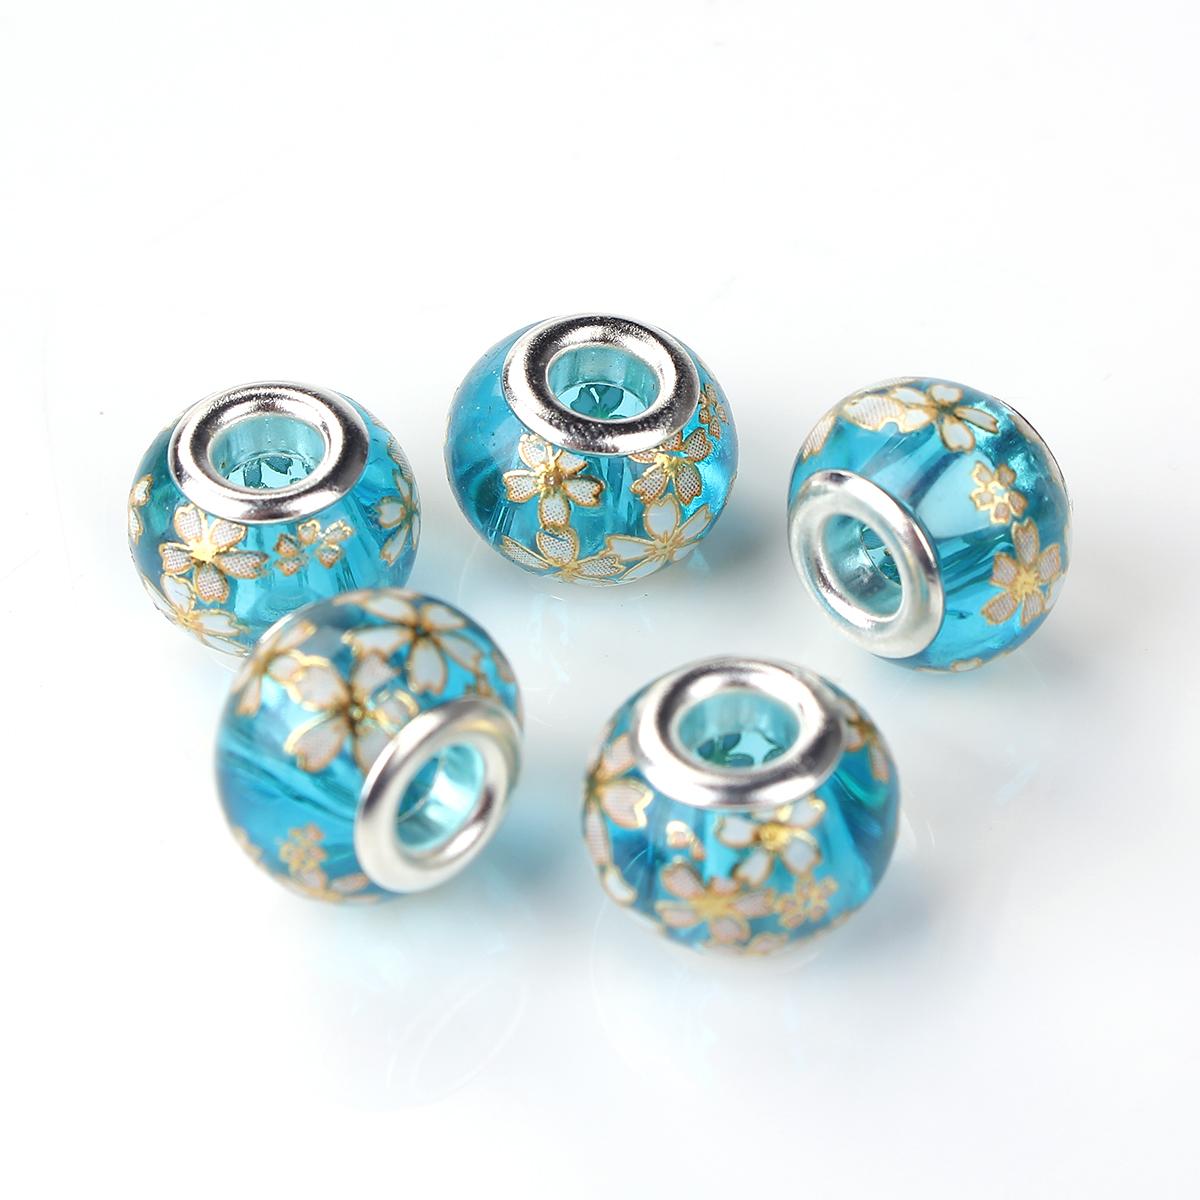 Picture of Glass Japan Painting Vintage Japanese Tensha European Style Large Hole Charm Beads Round Silver Plated Sakura Flower Lake Blue Transparent About 14mm( 4/8") Dia, Hole: Approx 4.7mm, 5 PCs